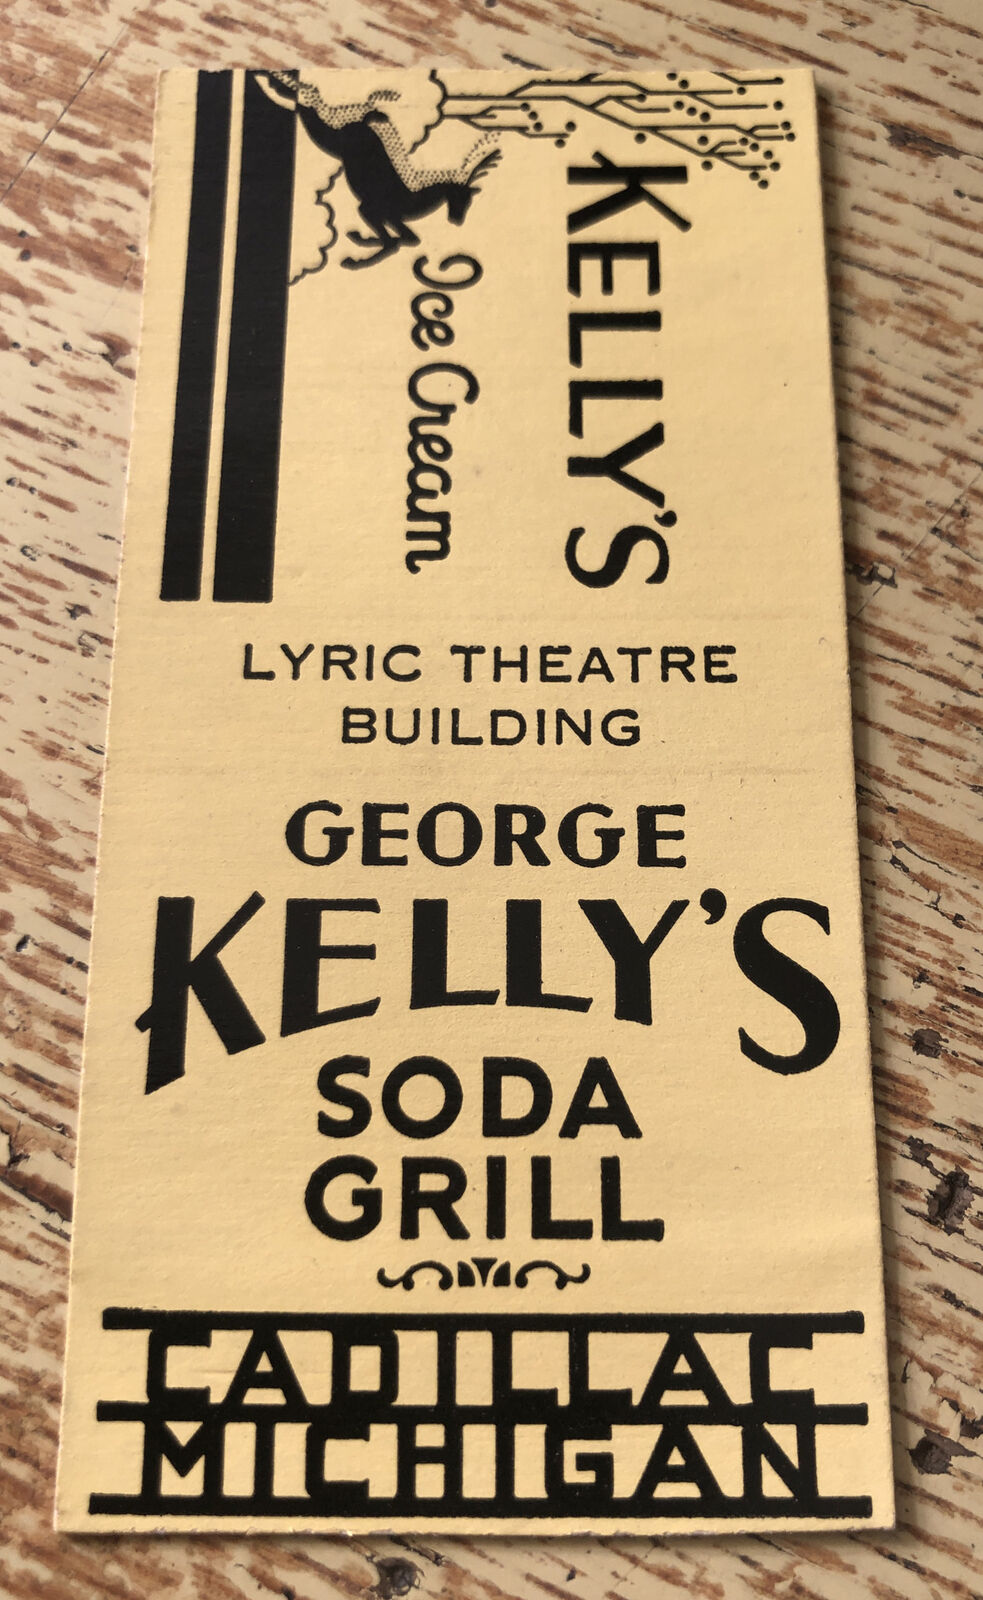 1930s-40s George Kelly’s Soda Grill Ice Cream Cadillac Michigan Matchbook Cover